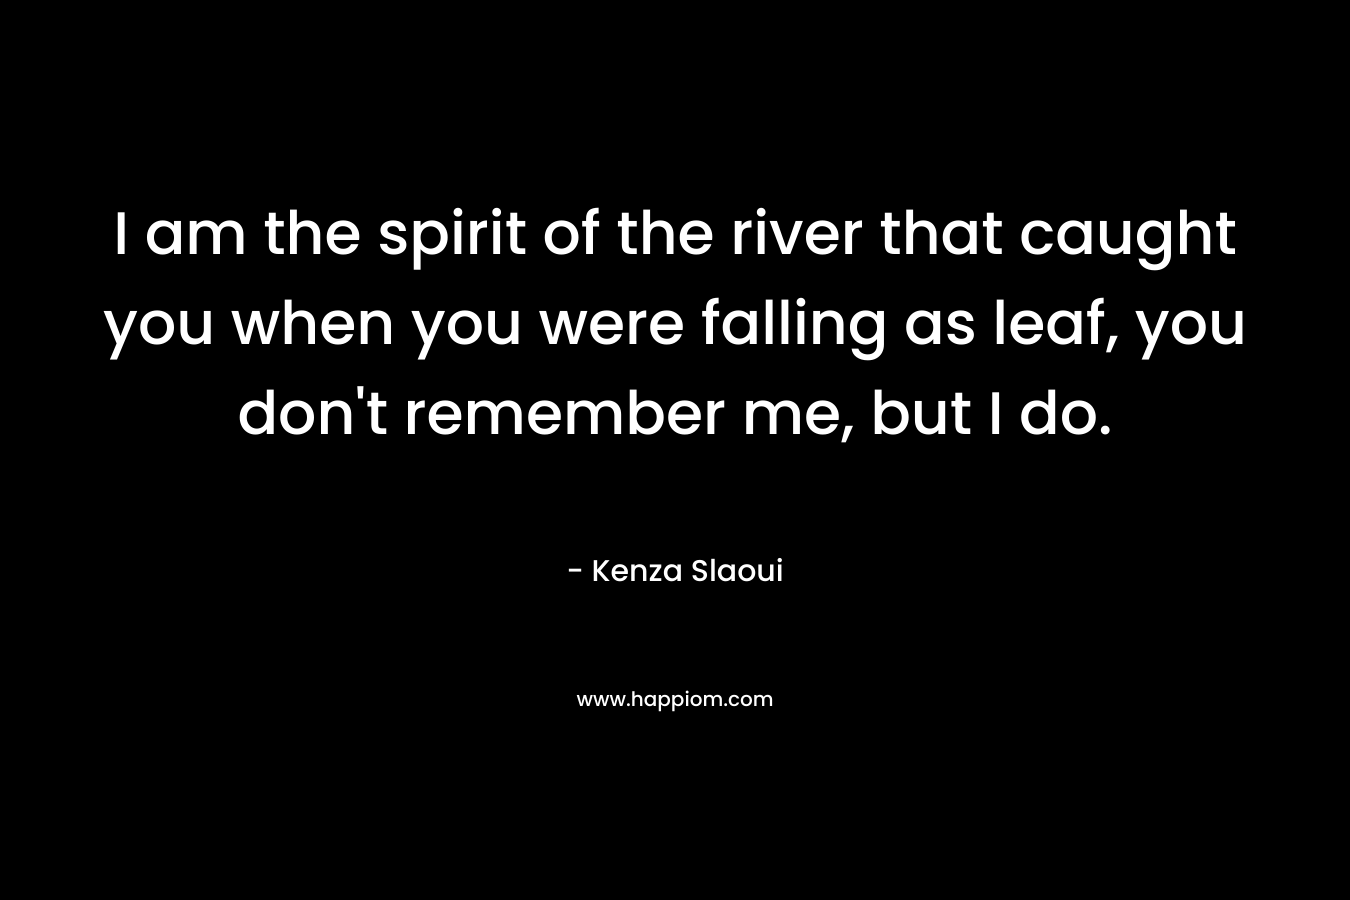 I am the spirit of the river that caught you when you were falling as leaf, you don't remember me, but I do.